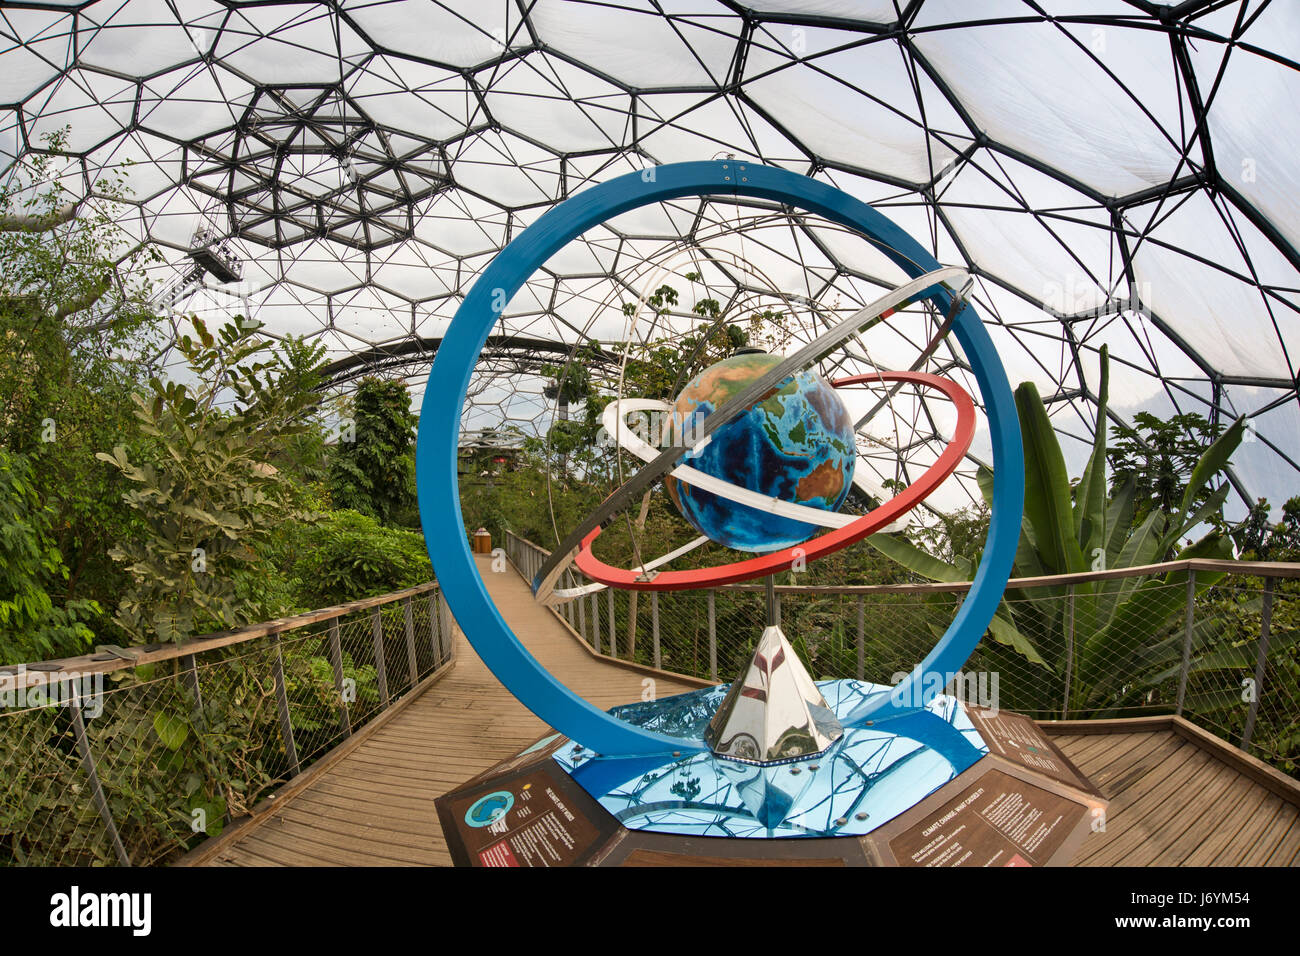 UK, Cornwall, St Austell, Bodelva, Eden Project, Rainforest Biome, globe climate change sculpture on elevated walkway Stock Photo